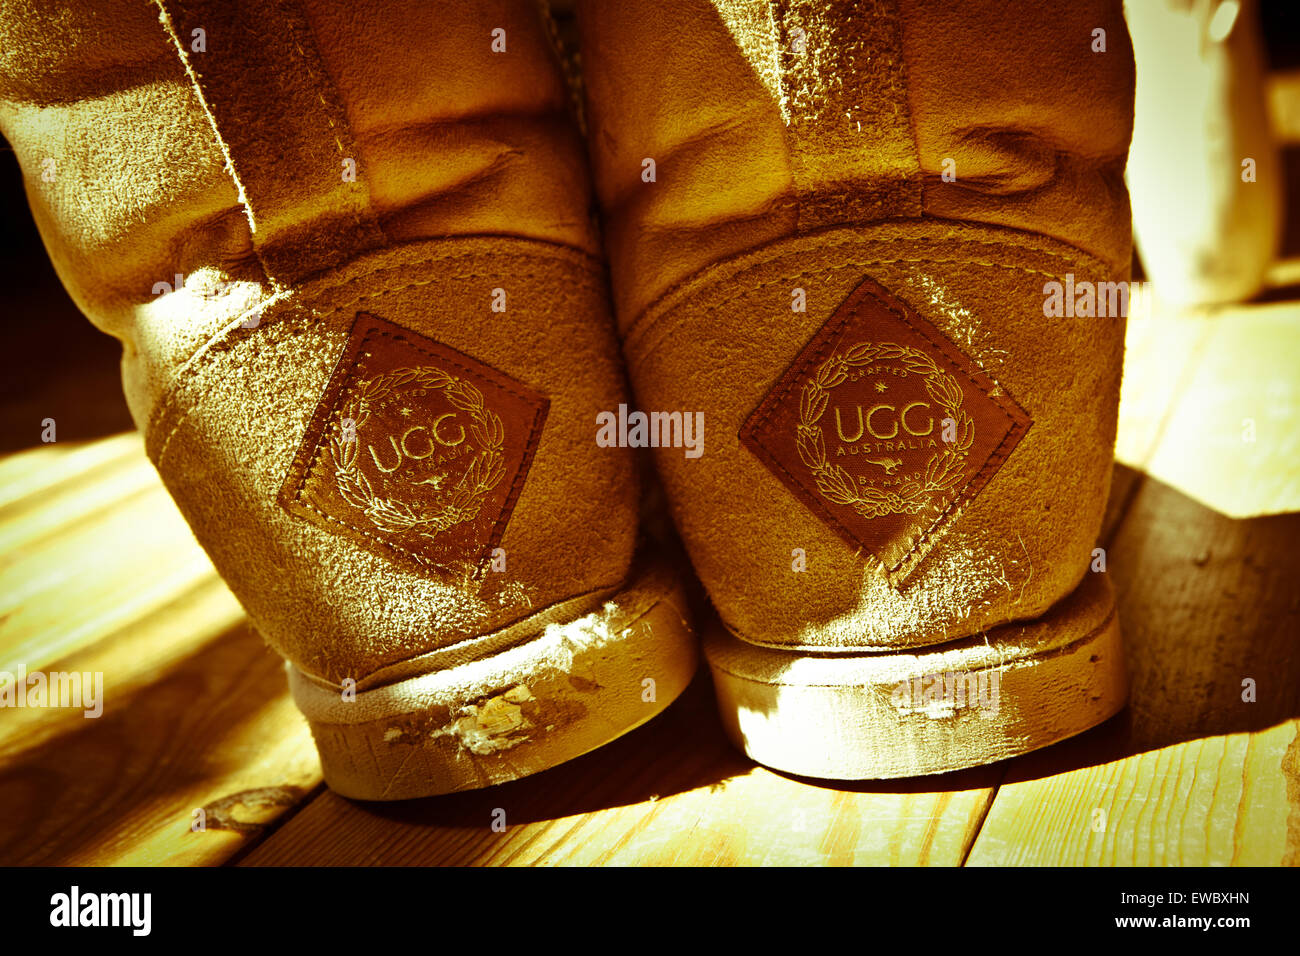 Ugg Boots in Sunlight Stock Photo